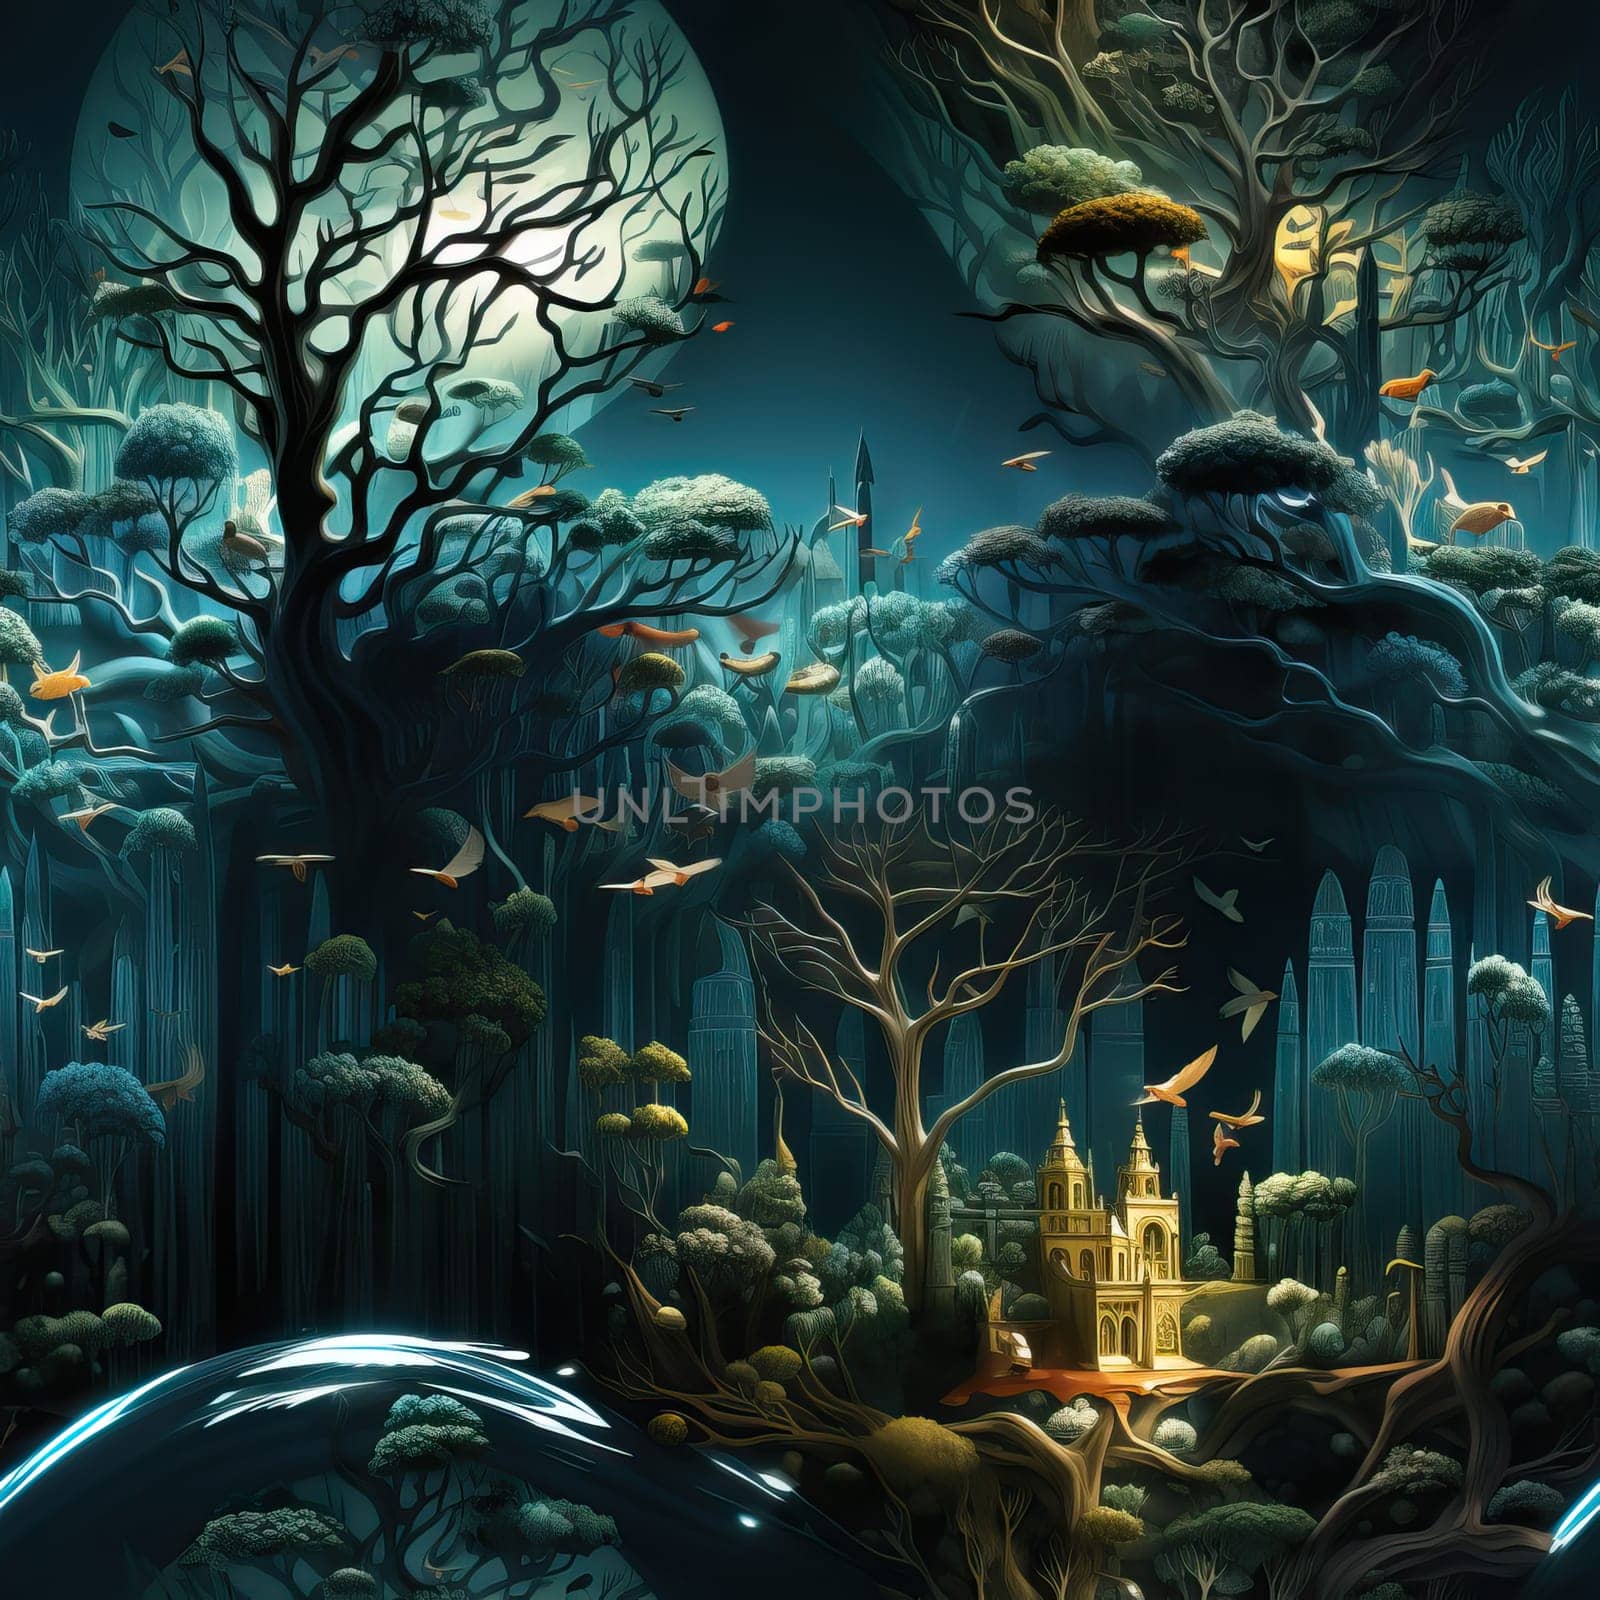 A painting depicting a dark night scene with towering trees and a majestic castle.